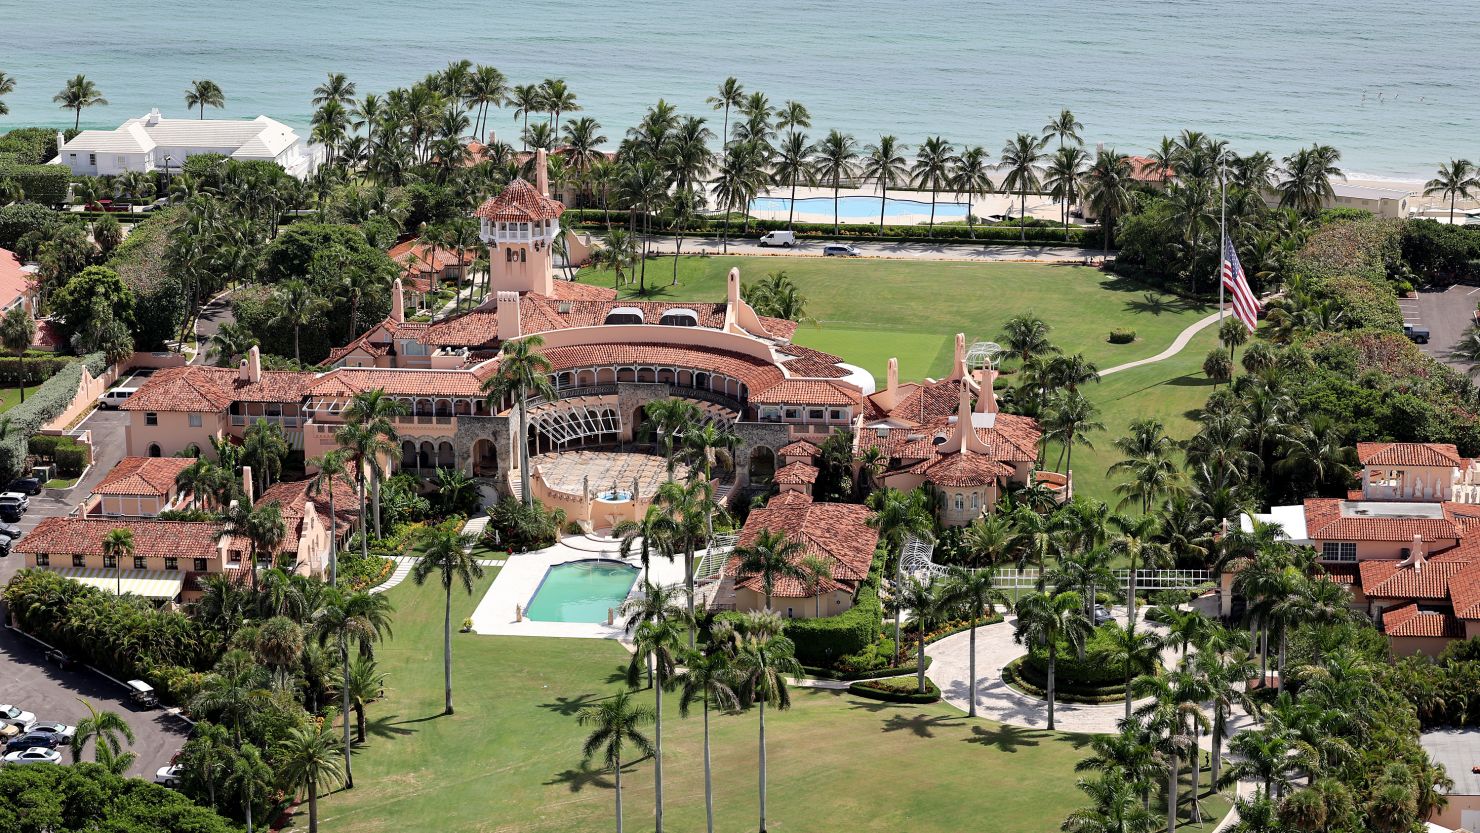 Former President Donald Trump's Mar-a-Lago estate is seen on September 14, 2022, in Palm Beach, Florida.